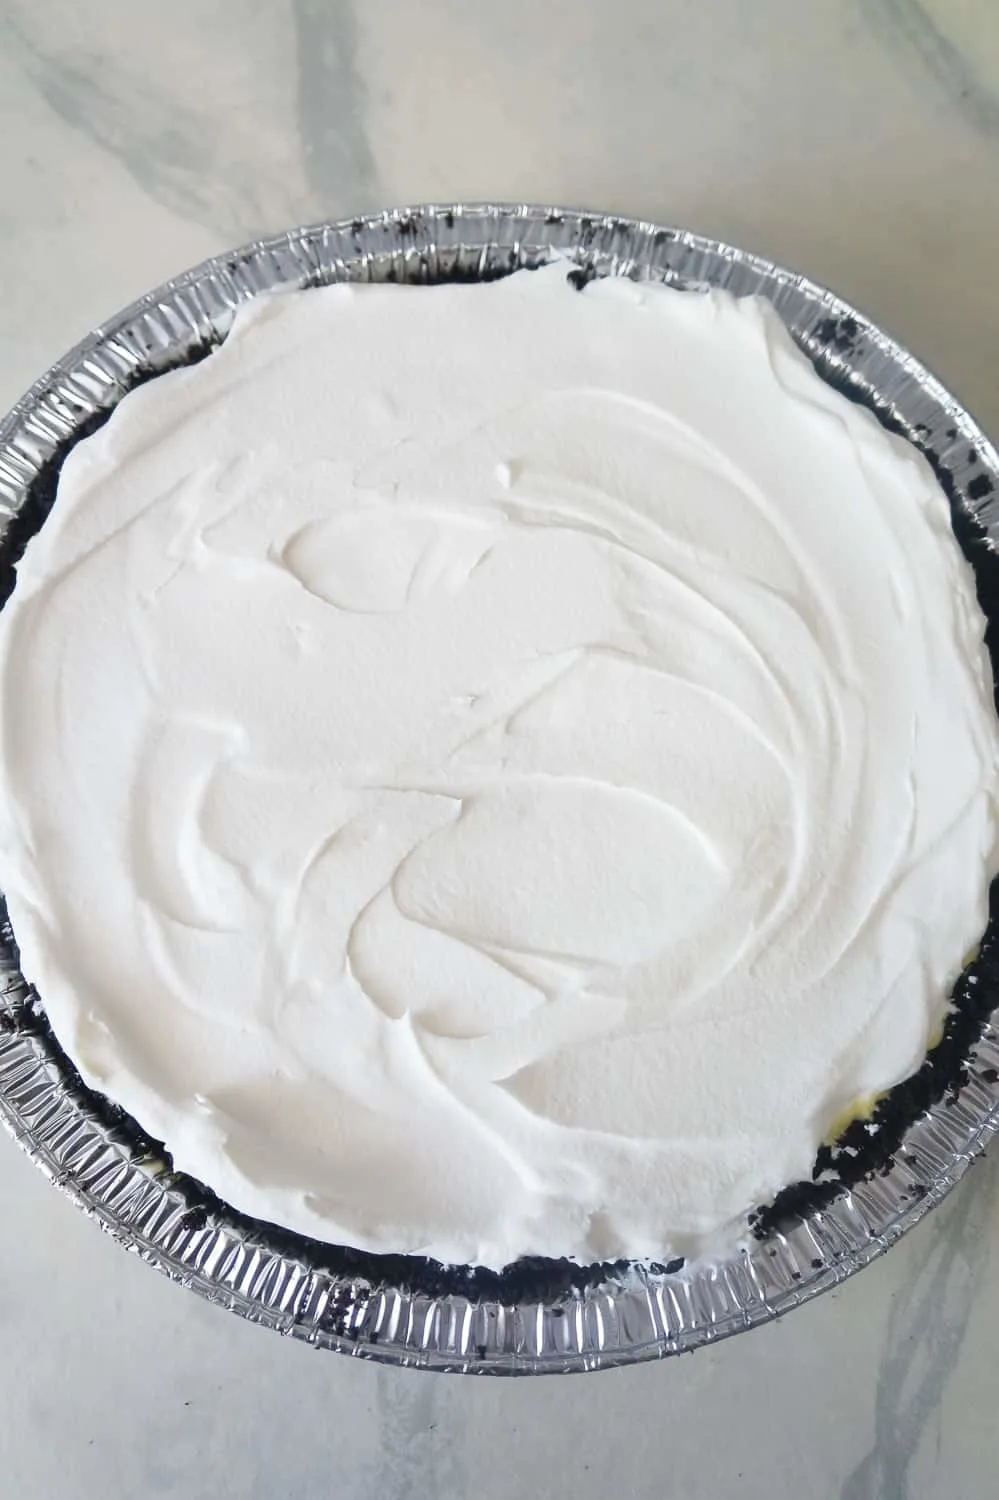 Cool Whip spread on top of no bake lemon pie